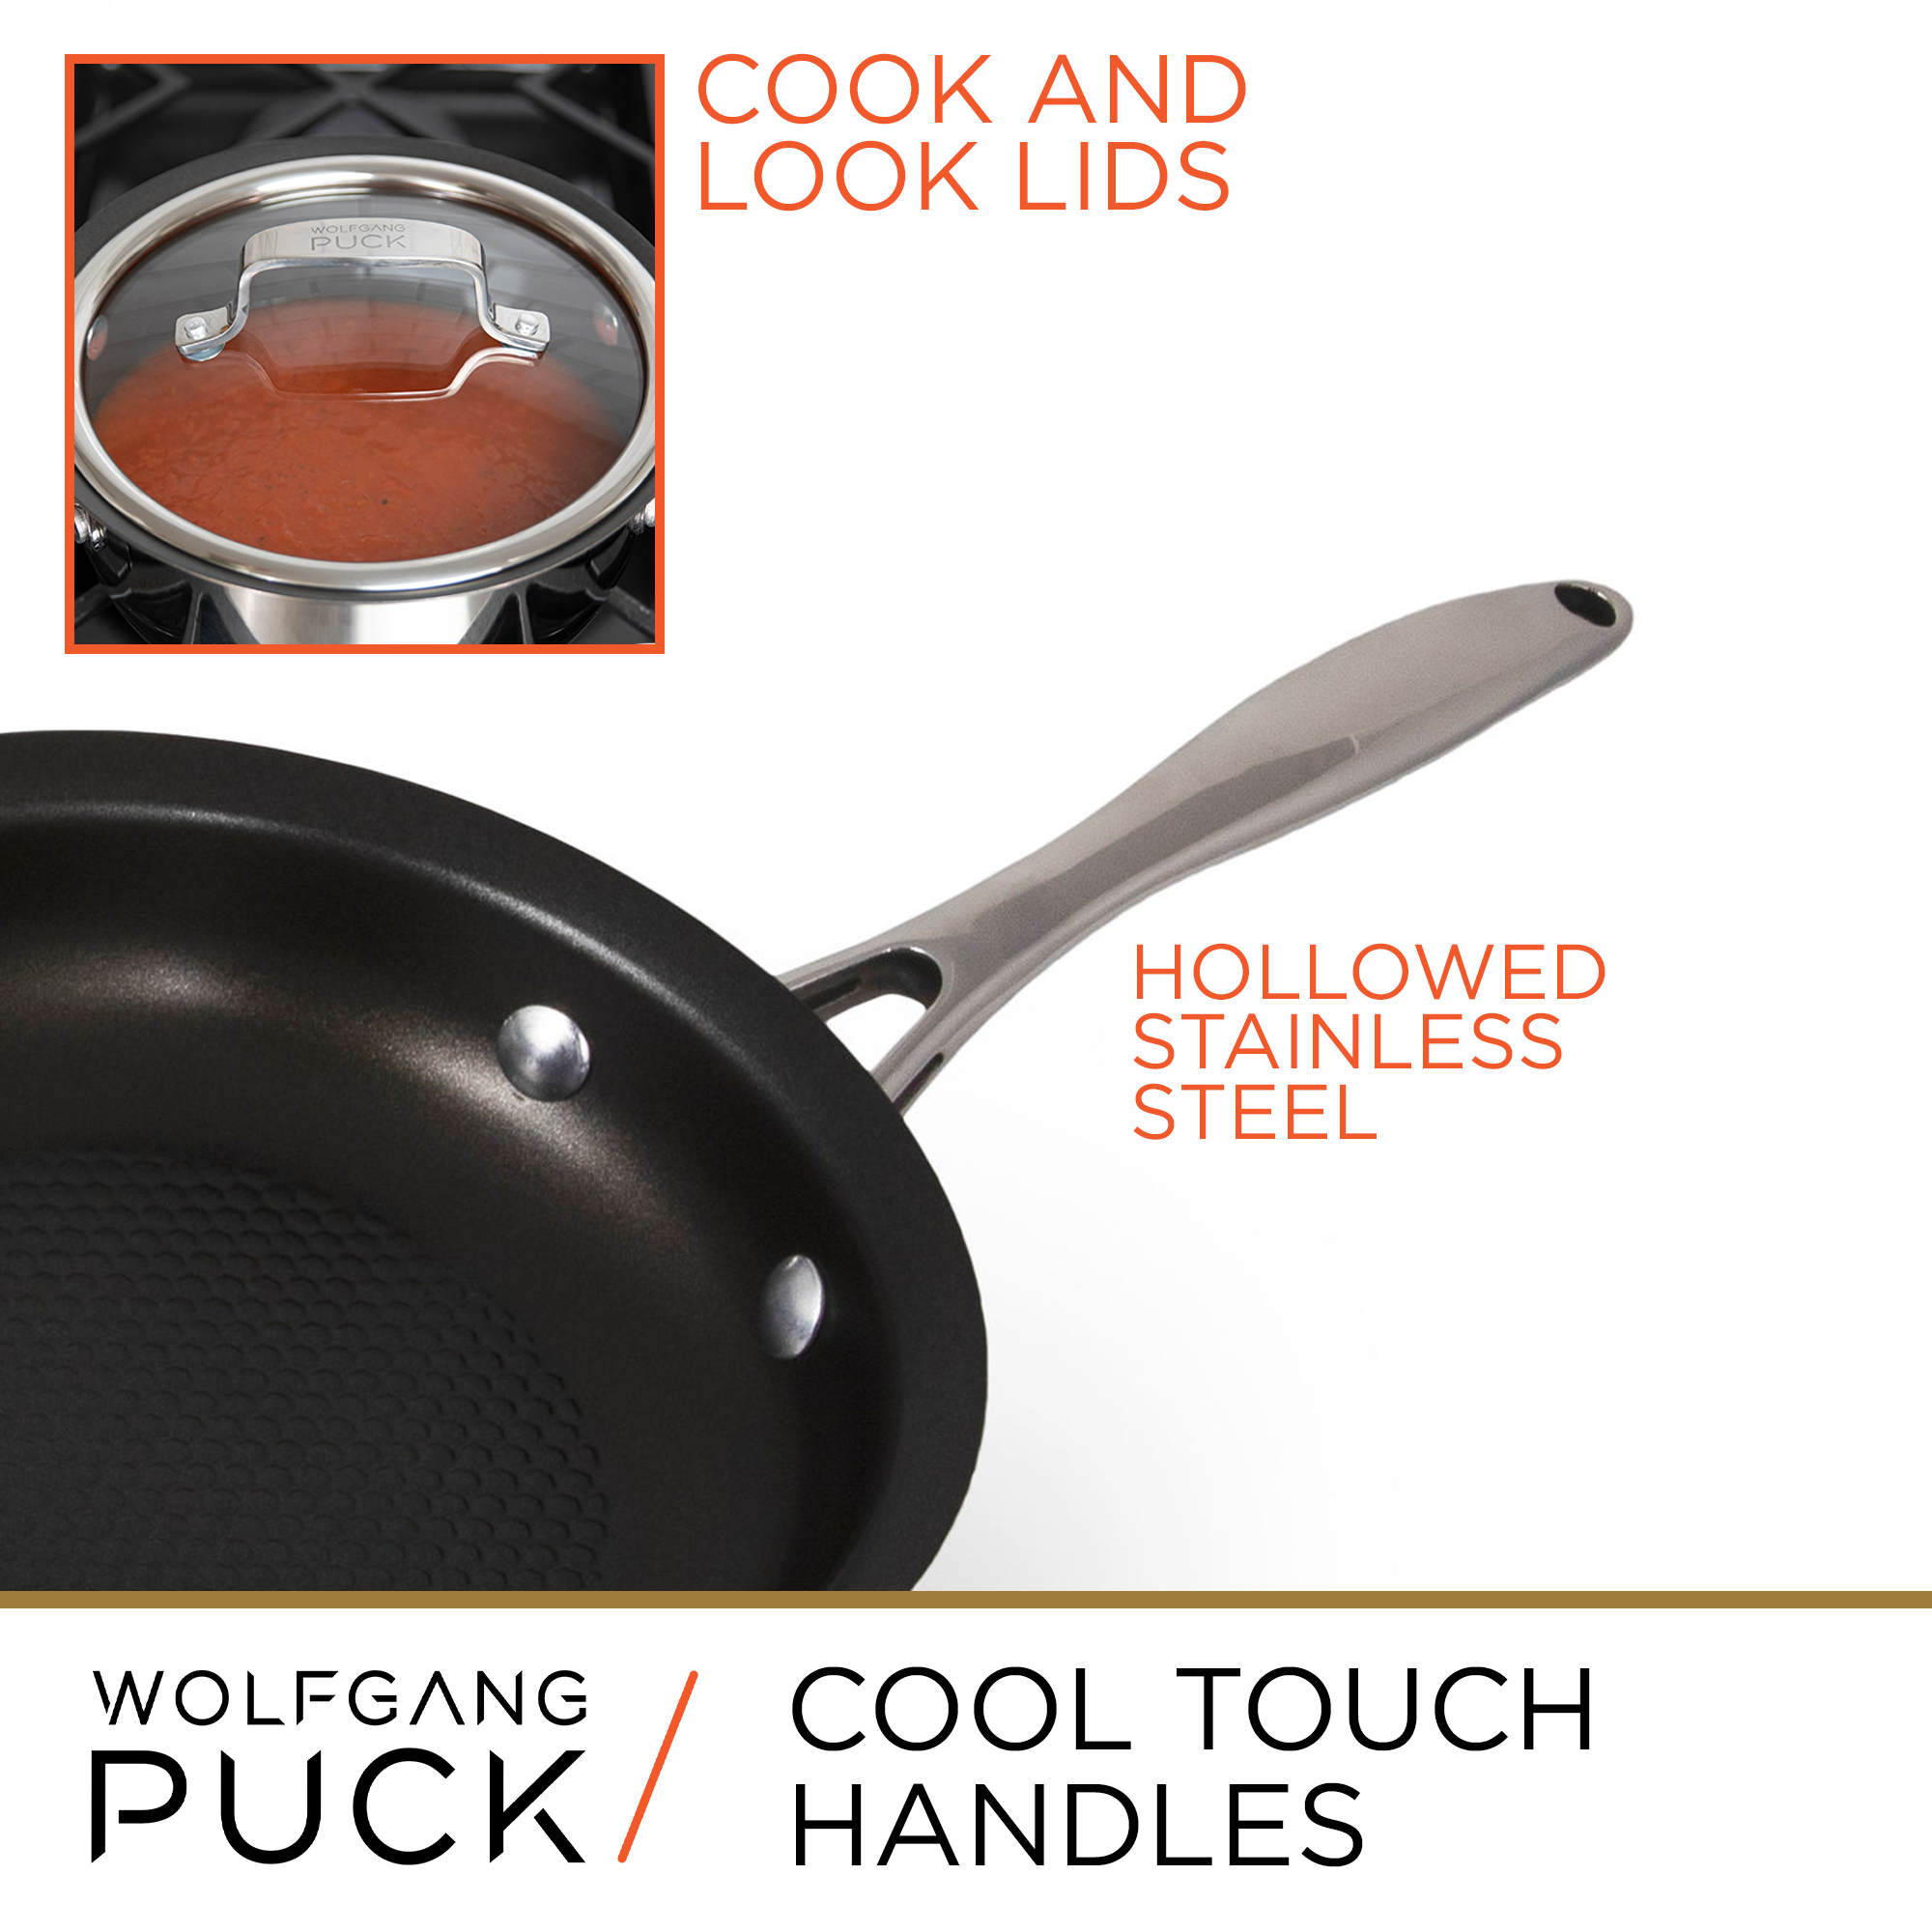 Wolfgang Puck Bistro 15pc Cookware Set…practically Brand New